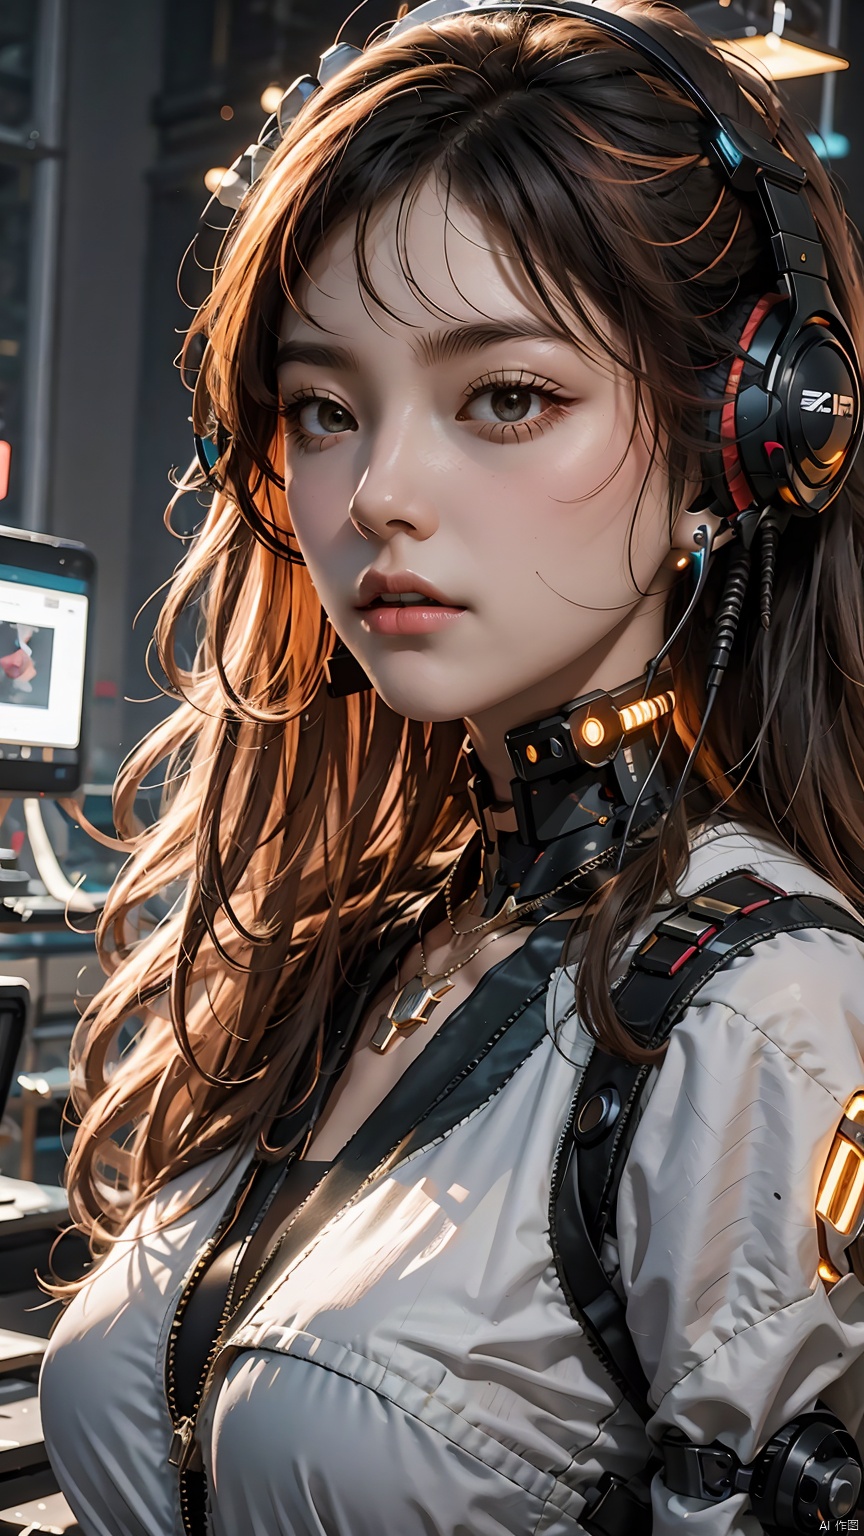 1girl,Cyberpunk,headset,Mechanical earphones,Mechanical necklace,Orange gradient hair,Fragmented mechanical neck guard,Oblique side close-up,Black mecha,Full body mecha,Looking at the camera,Knitted fabric near the shoulders,Fragmented mecha,Technological background,Mechanical body,Super complex mechanical structure,Multiple light sources on the body,Orange long hair,indoor, 1girl,Cyberpunk,Mechanical earphones